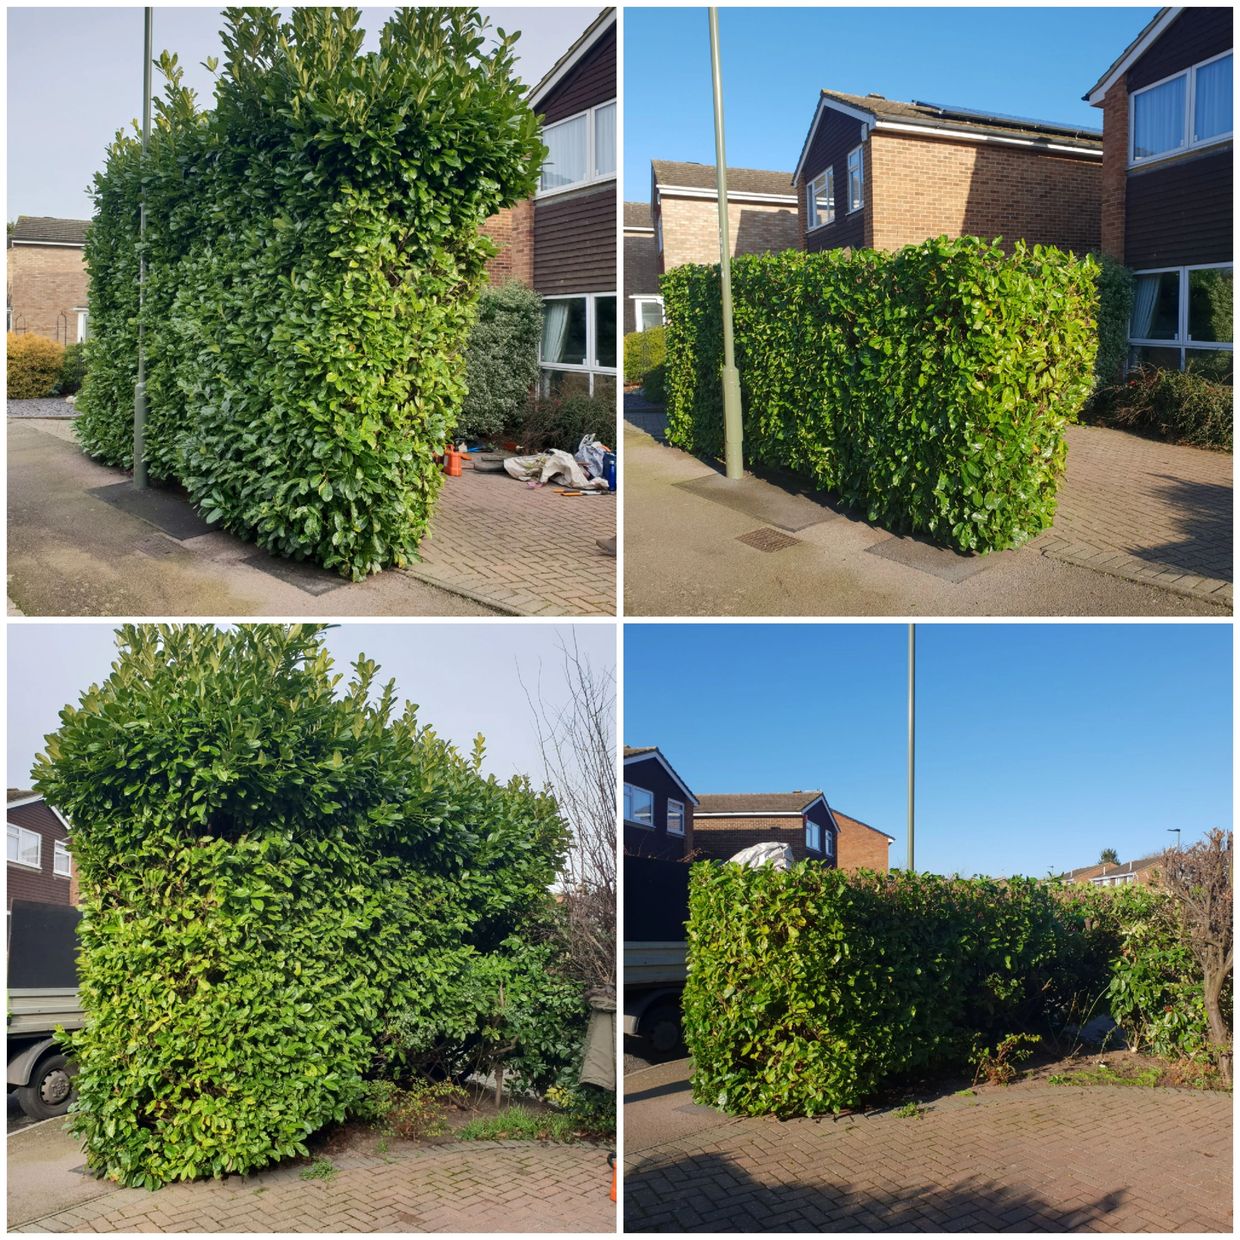 Hedge reduction and trimming collage